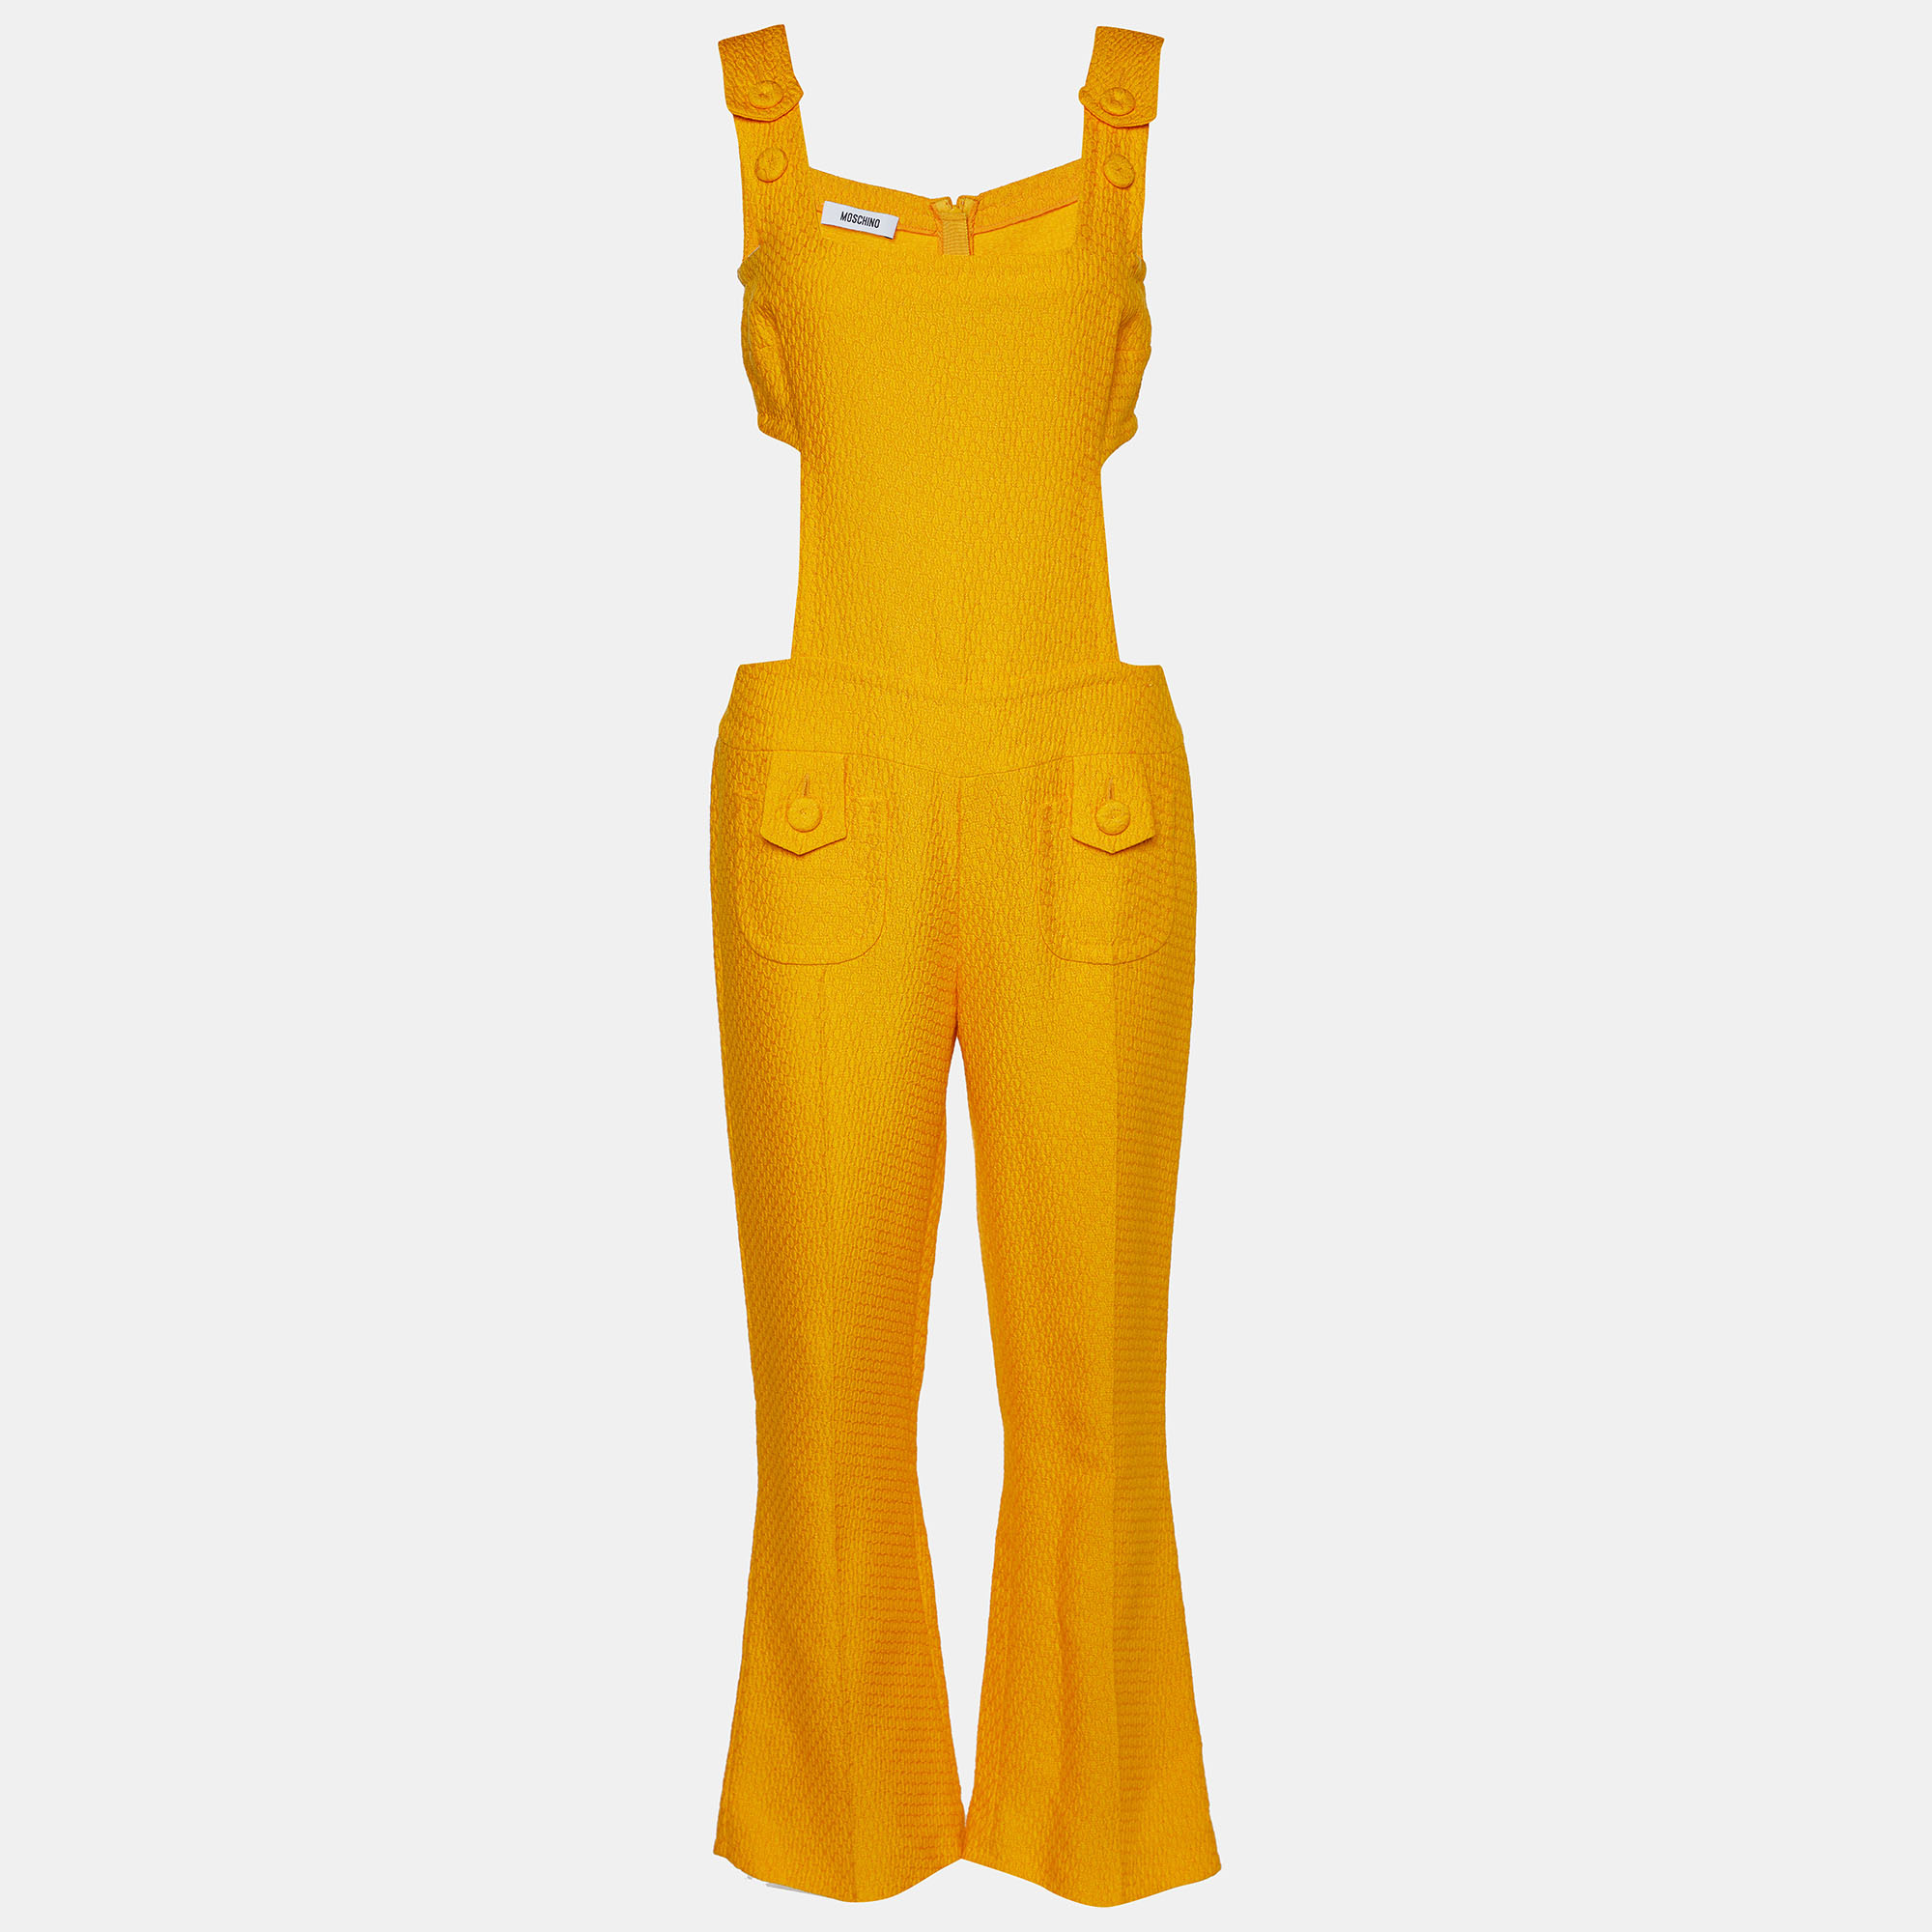 Moschino yellow textured cotton cutout detail jumpsuit s